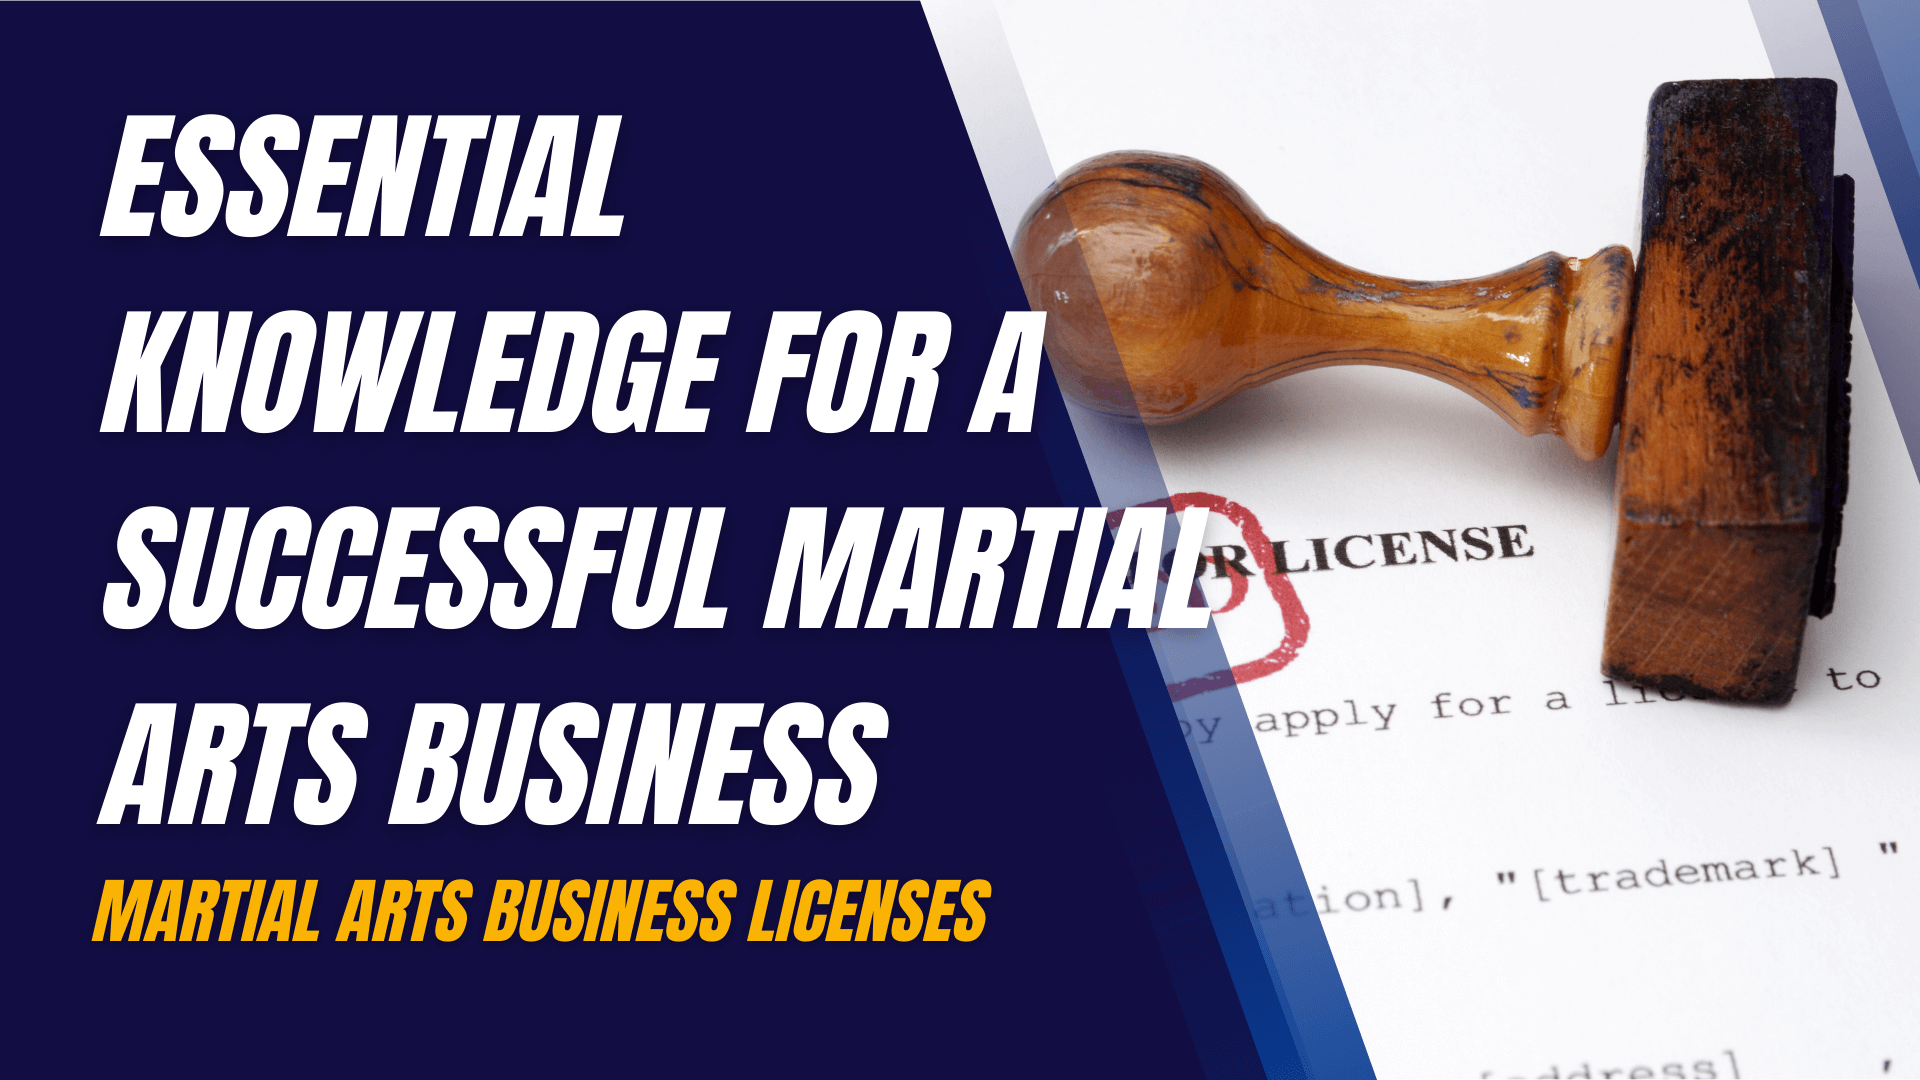 Essential Knowledge for a Successful Martial Arts Business: Martial Arts Business Licenses